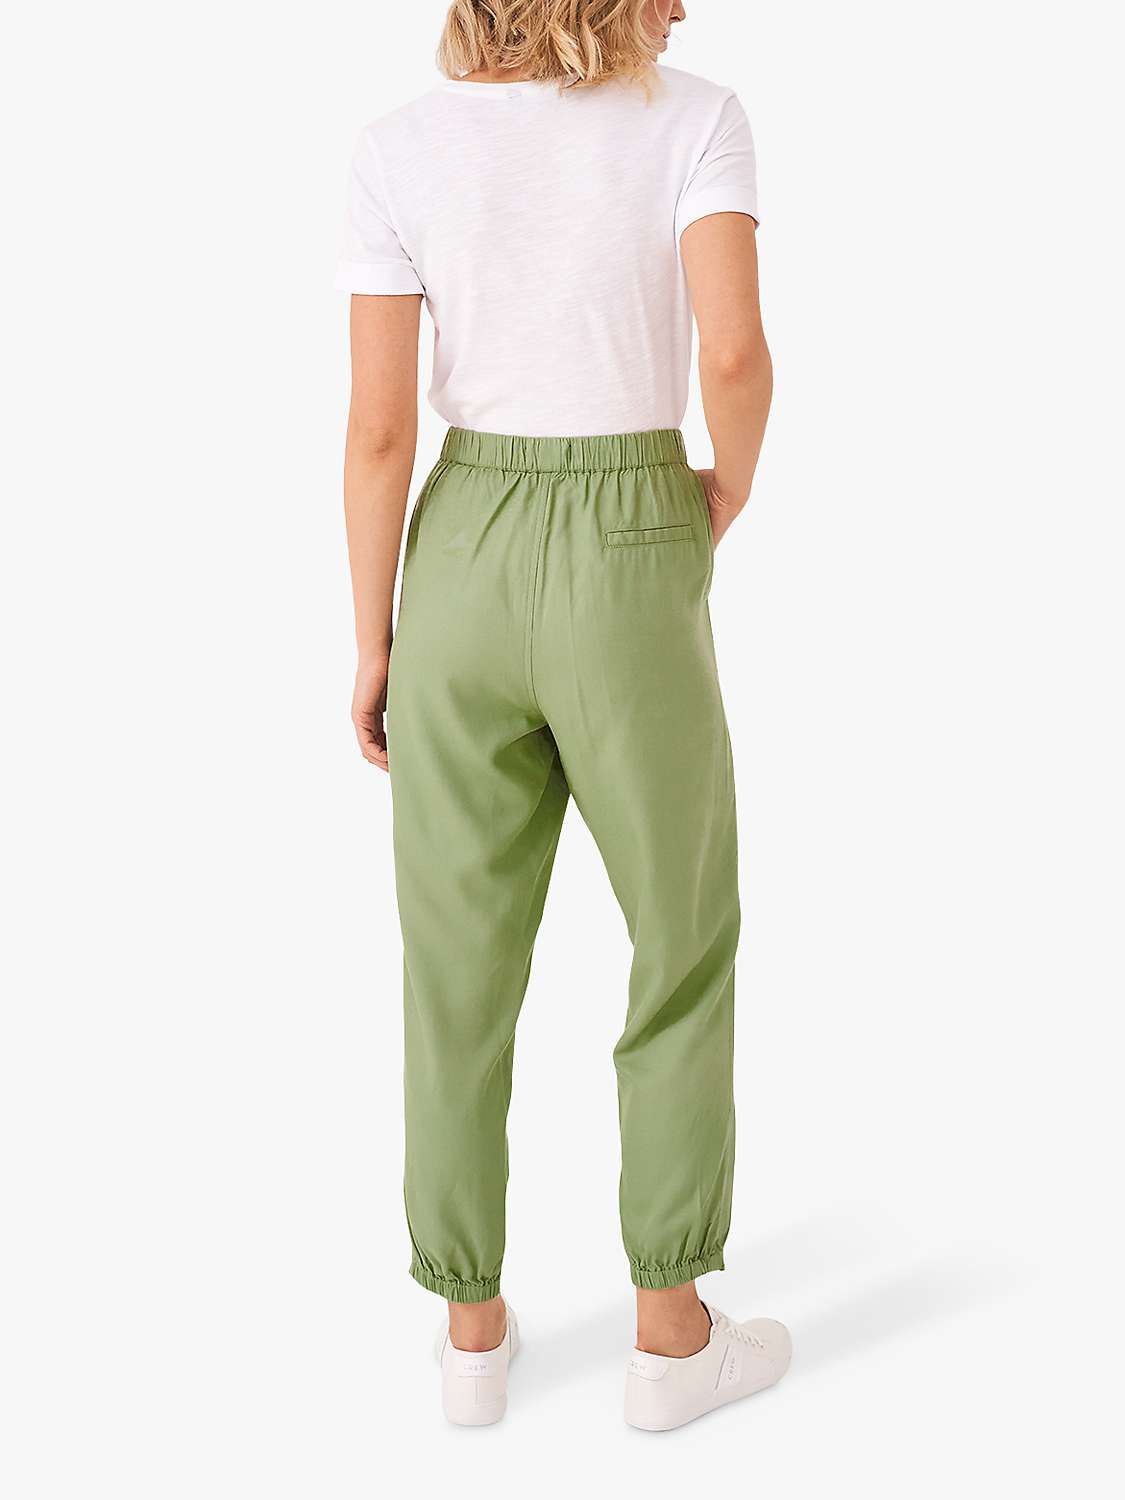 Buy Crew Clothing Relaxed Viscose Twill Trousers, Light Green Online at johnlewis.com